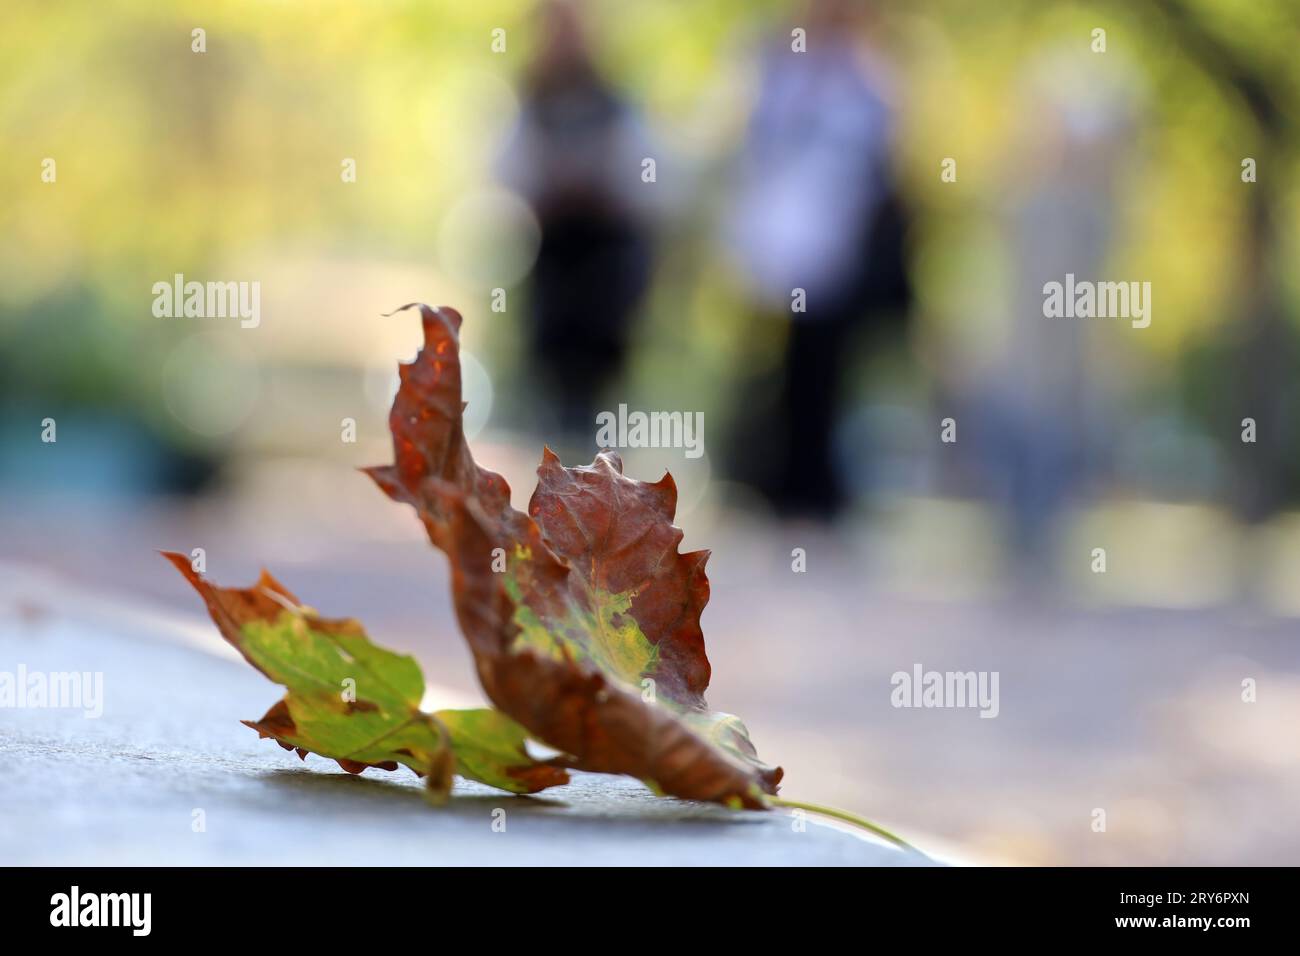 Autumn season, fallen maple leaf on concrete curb in city park on blurred people background Stock Photo